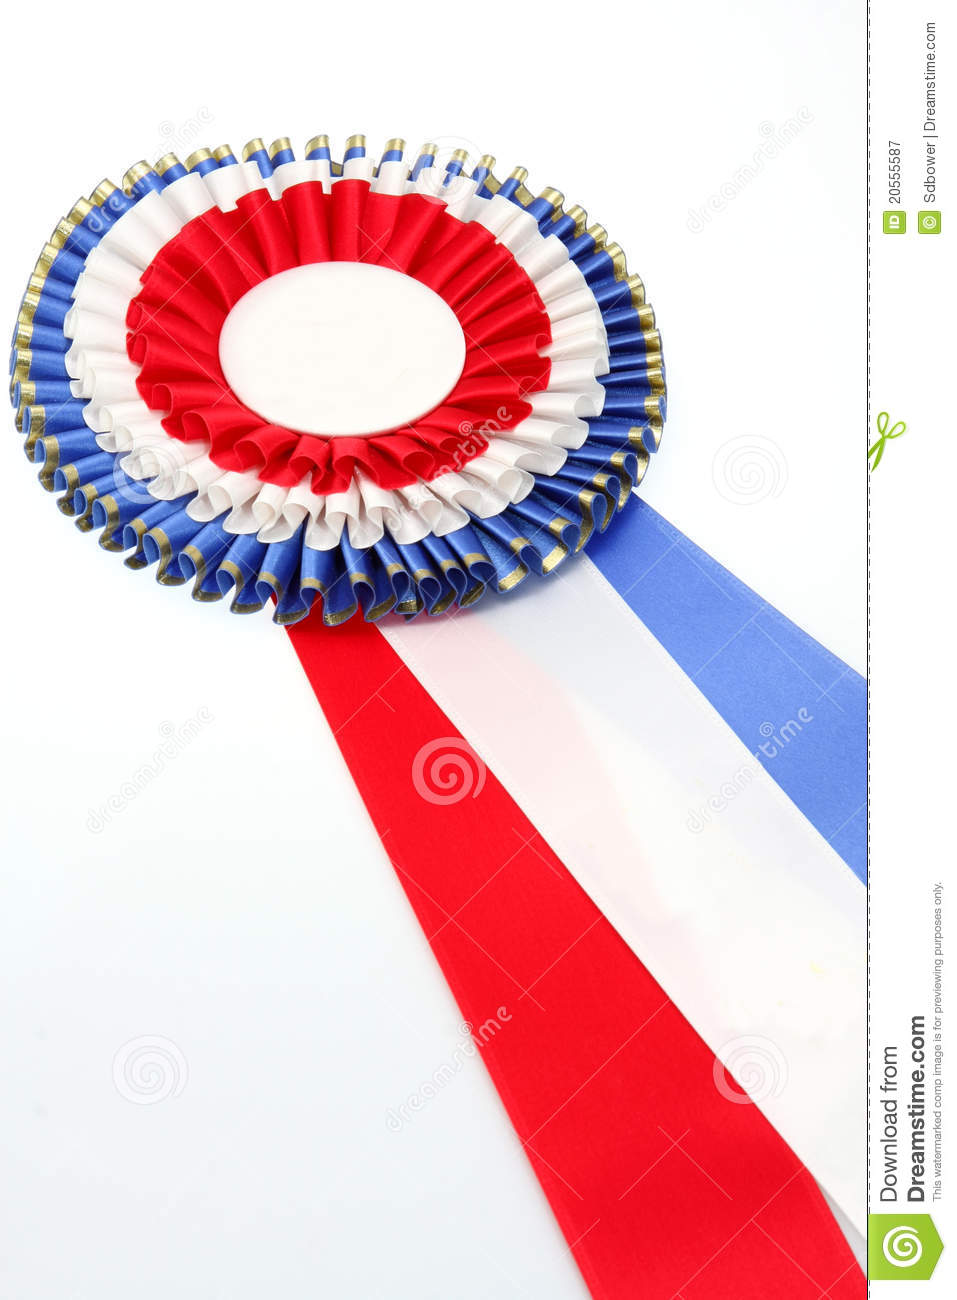 Best Of Show Ribbon Royalty Free Stock Photography   Image  20555587